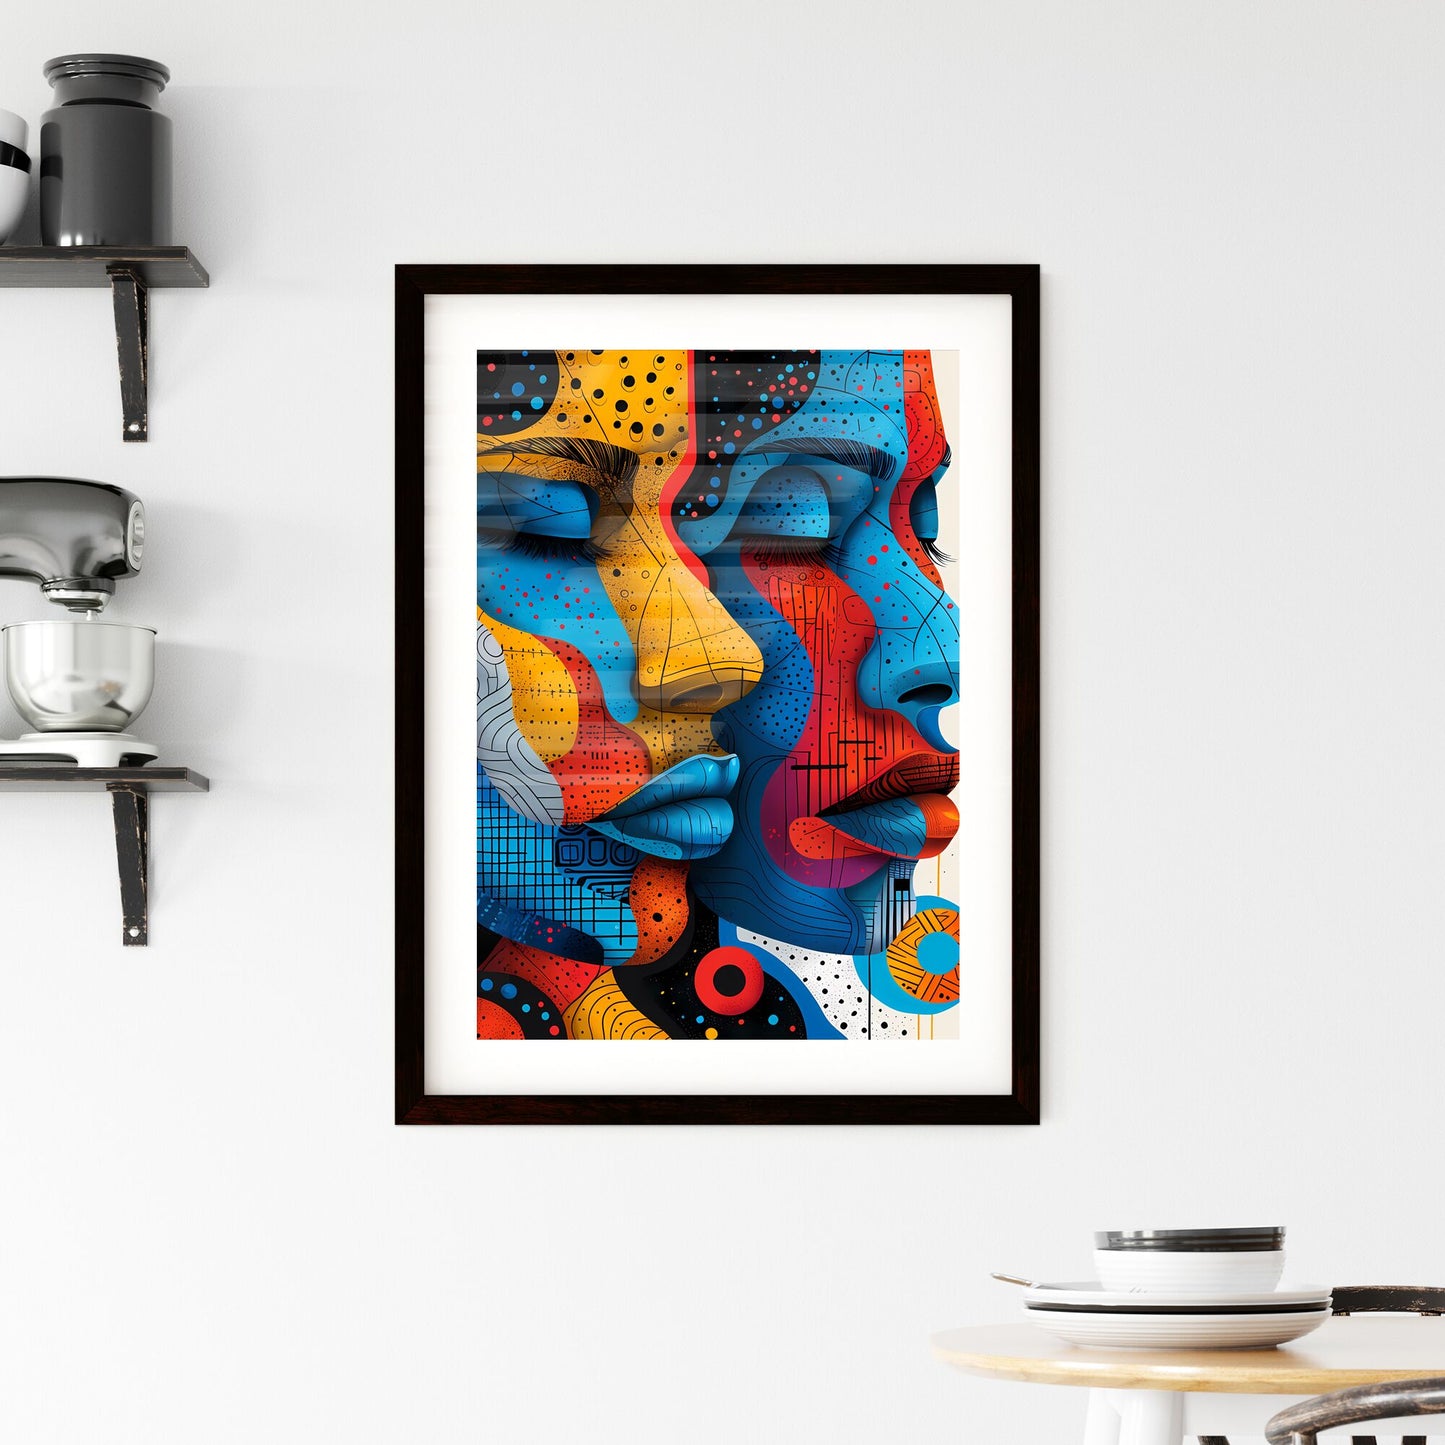 Abstract Art: Modern African Style with Patterns, Human Shapes, and Urban Vibes in Vibrant Pastel Colors - A Captivating Painting Image! Default Title